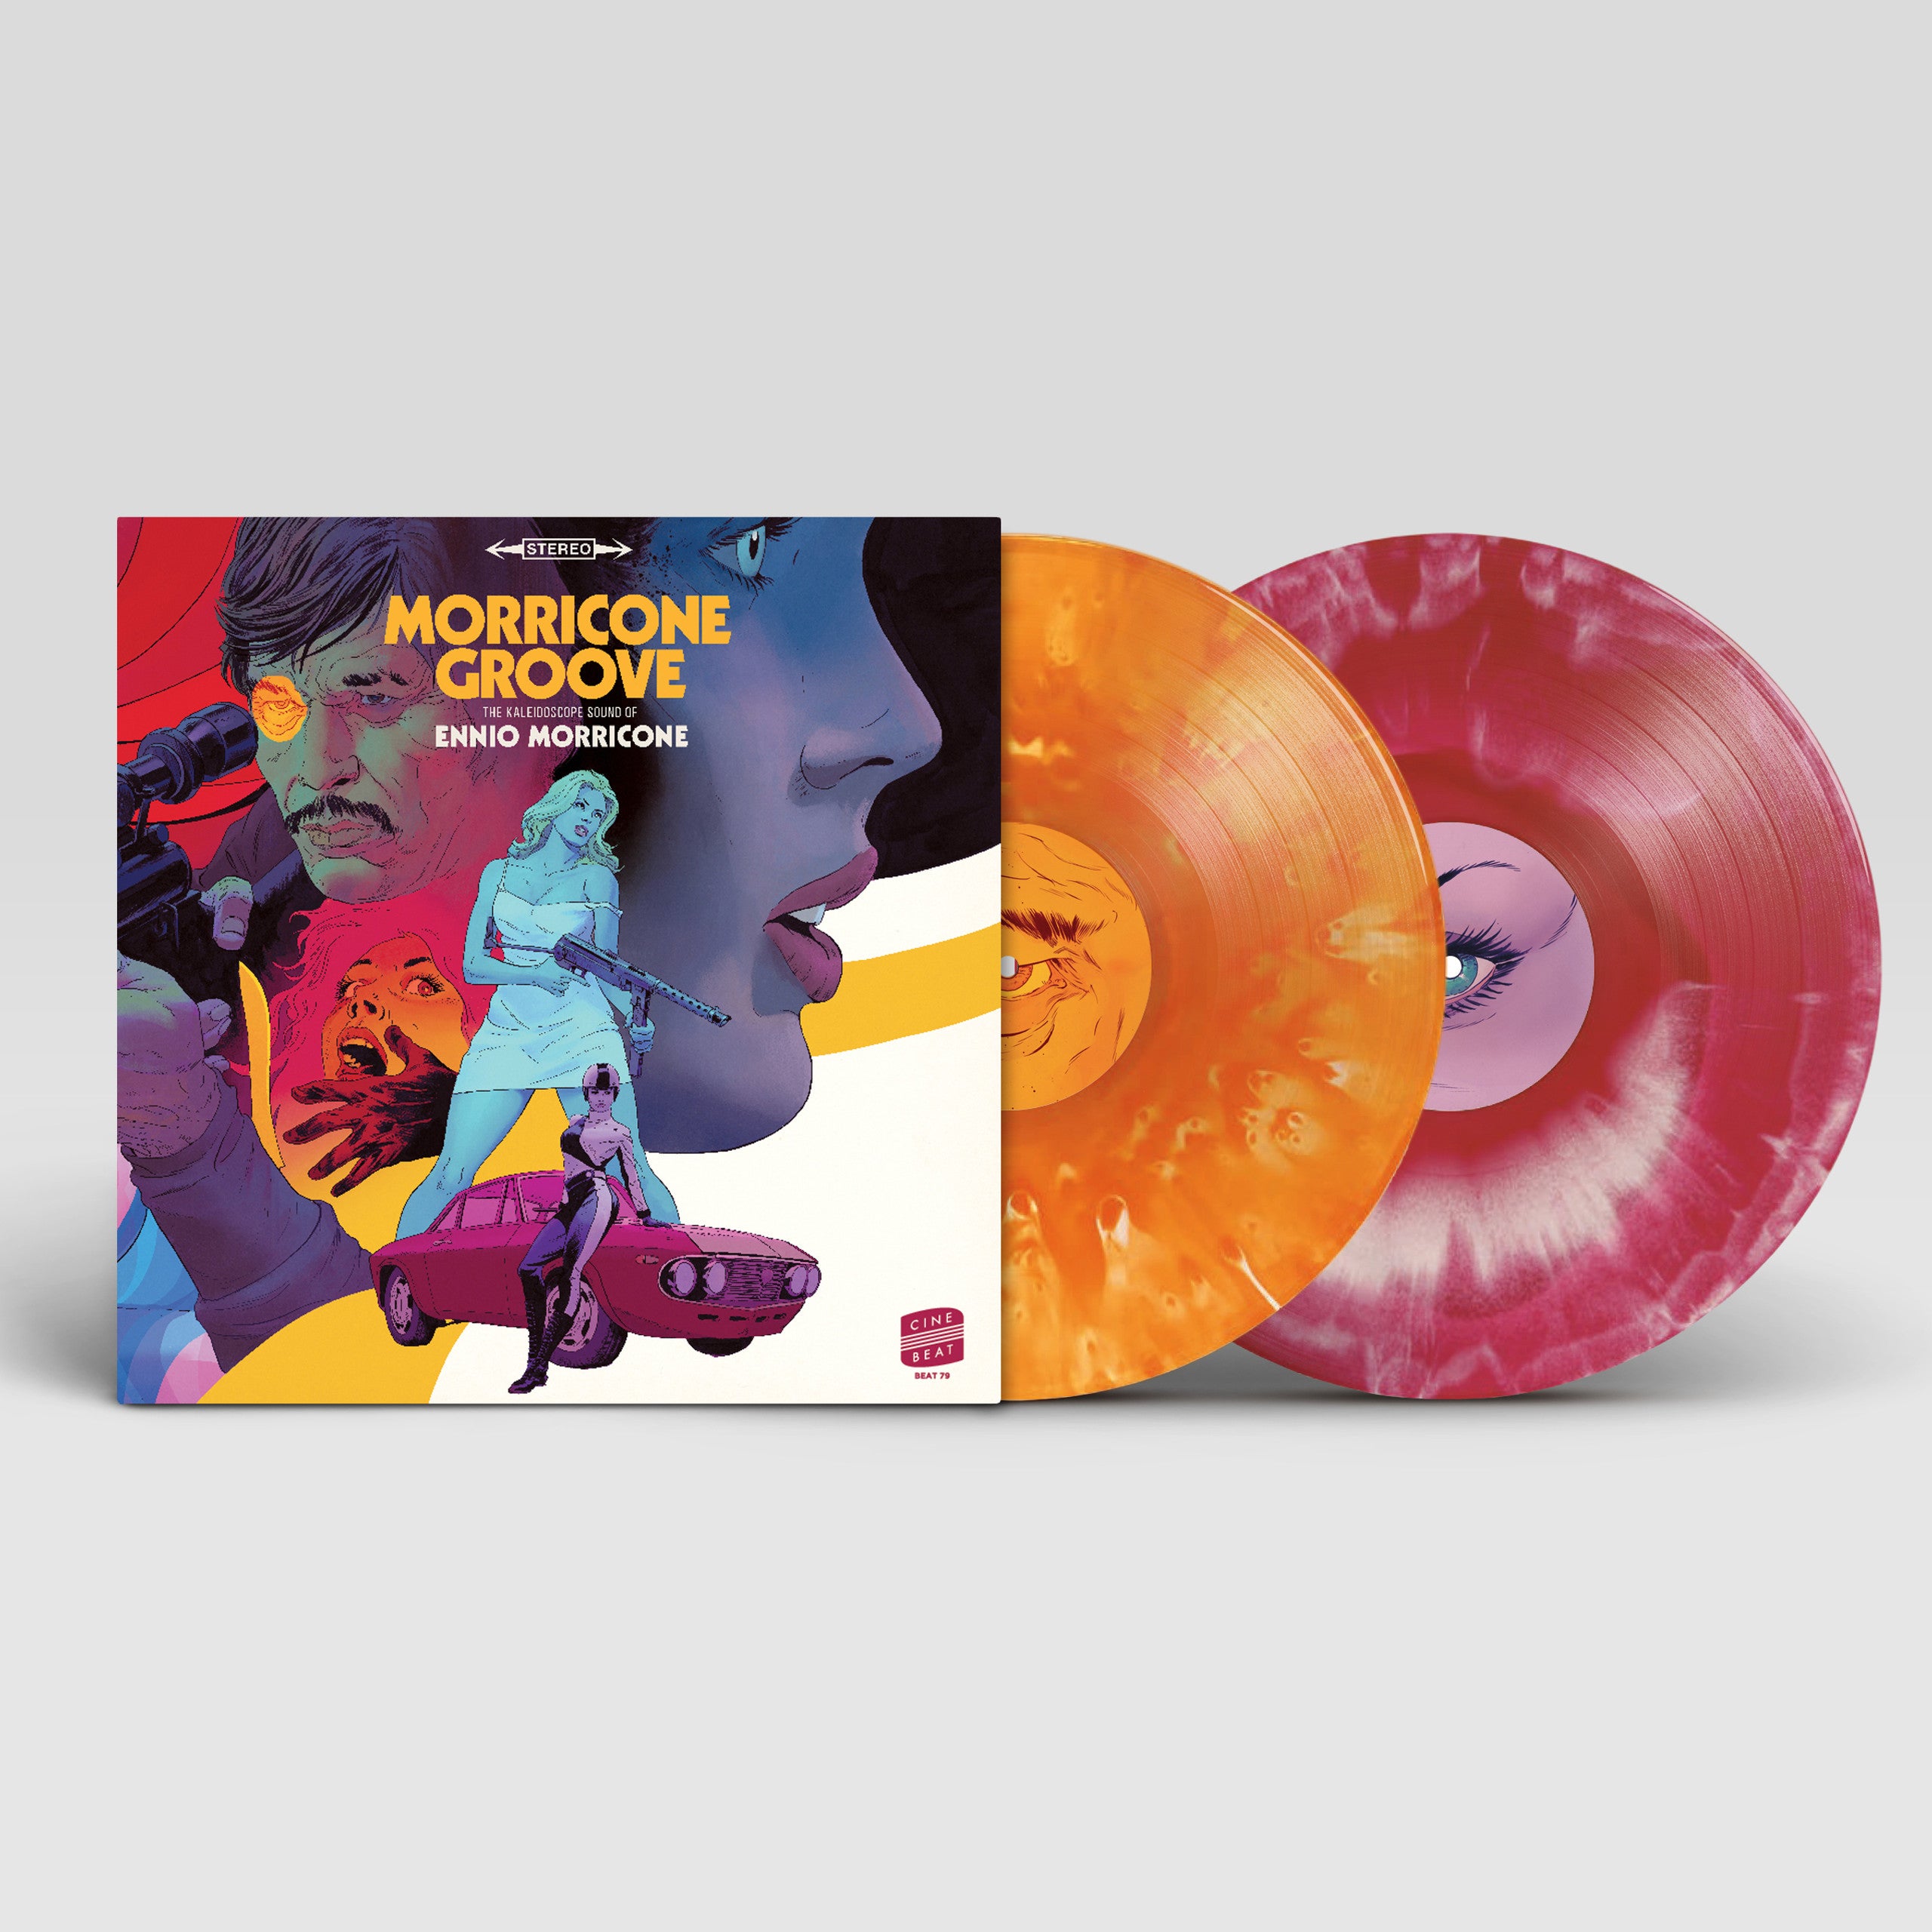 Ennio Morricone - Morricone Groove: The Kaleidoscope Sound Of Ennio Morricone 1964-1977 (Soundtrack) [2LP] ('Sunset Sky' & 'Bloody Eyeball' Colored Vinyl, 8 page insert with poster archives, gatefold)